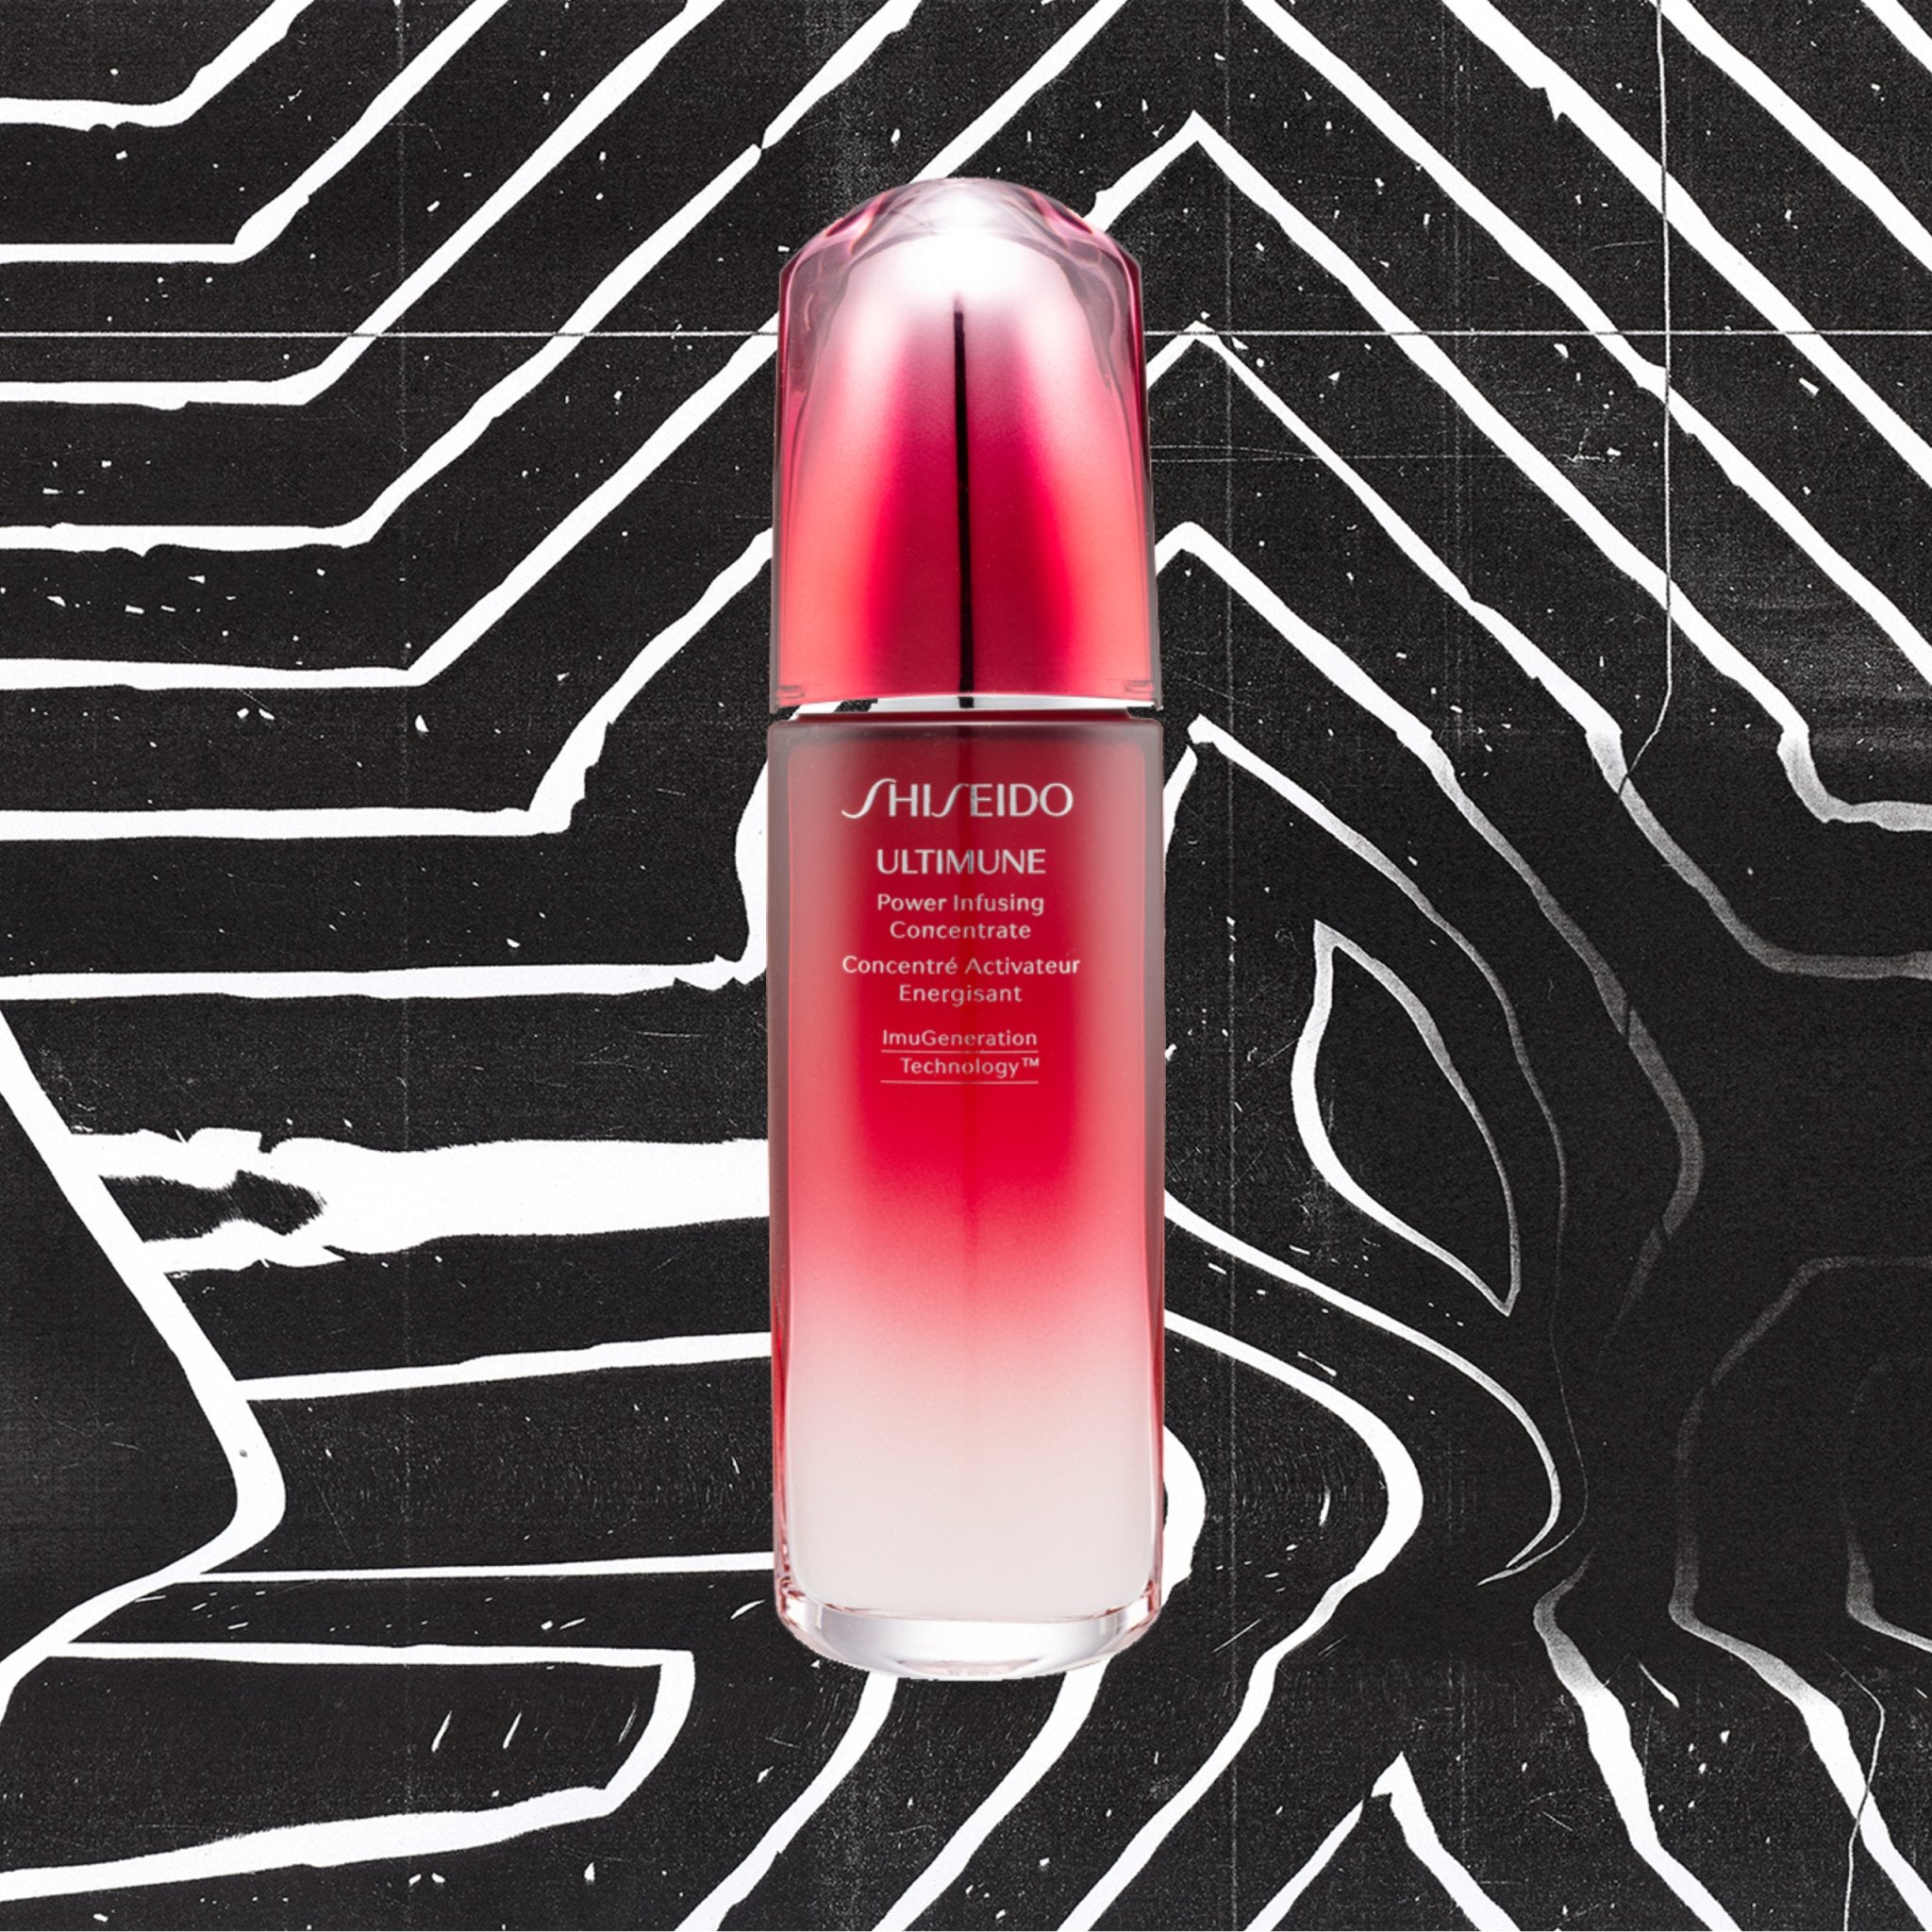 Inside The Beauty Edit[ed] Box: Shiseido Ultimune Power Infusing Concentrate